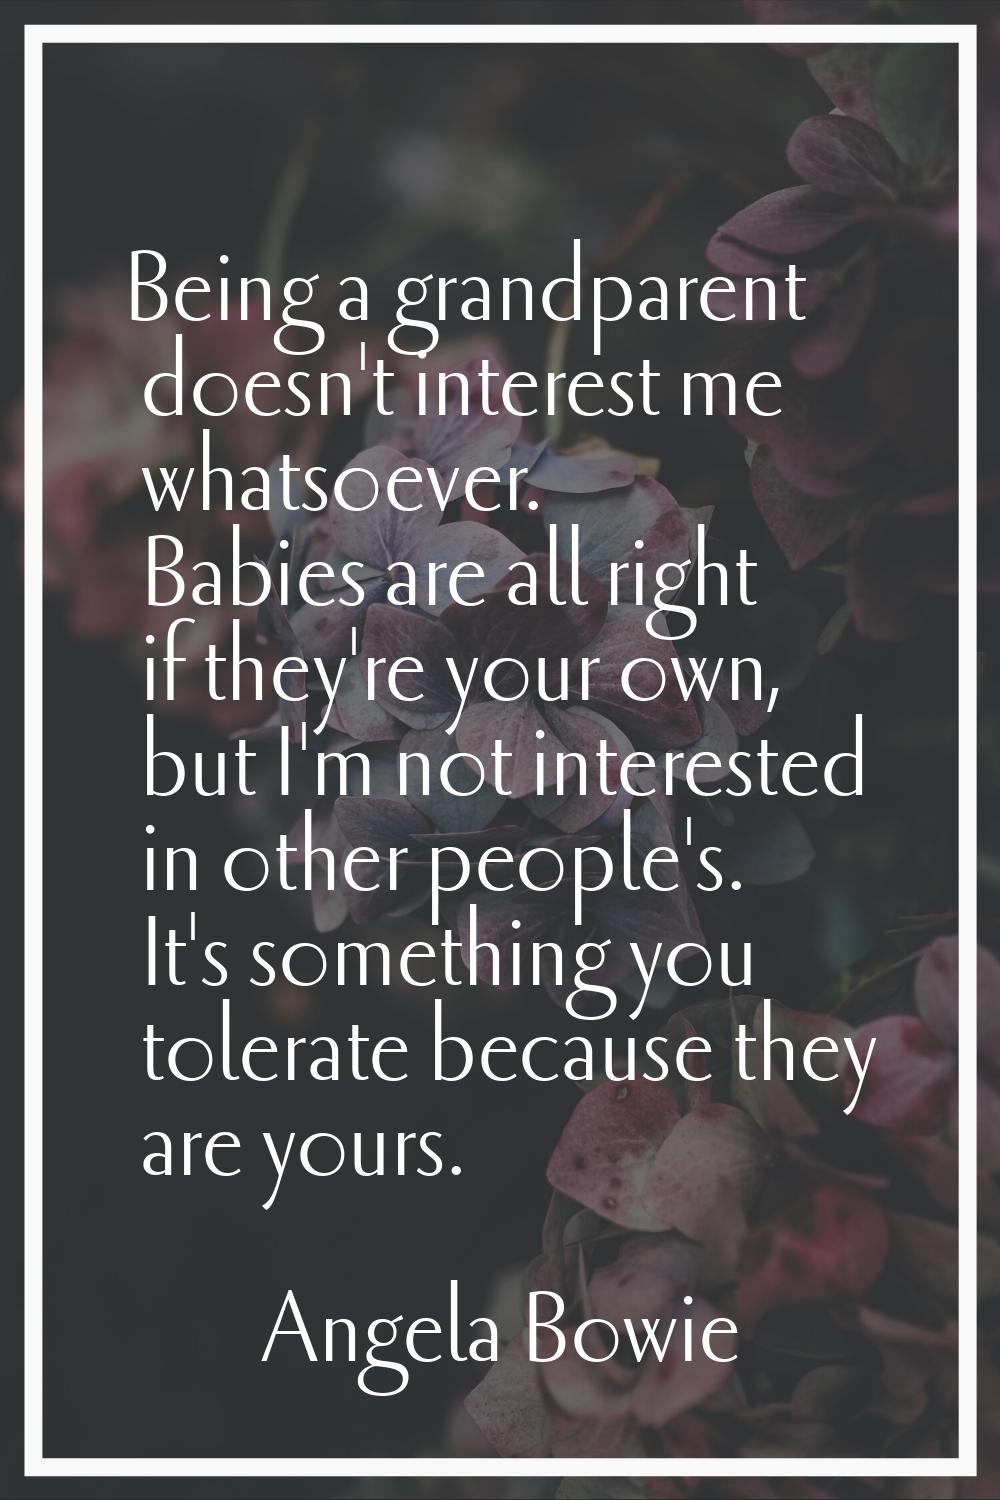 Being a grandparent doesn't interest me whatsoever. Babies are all right if they're your own, but I